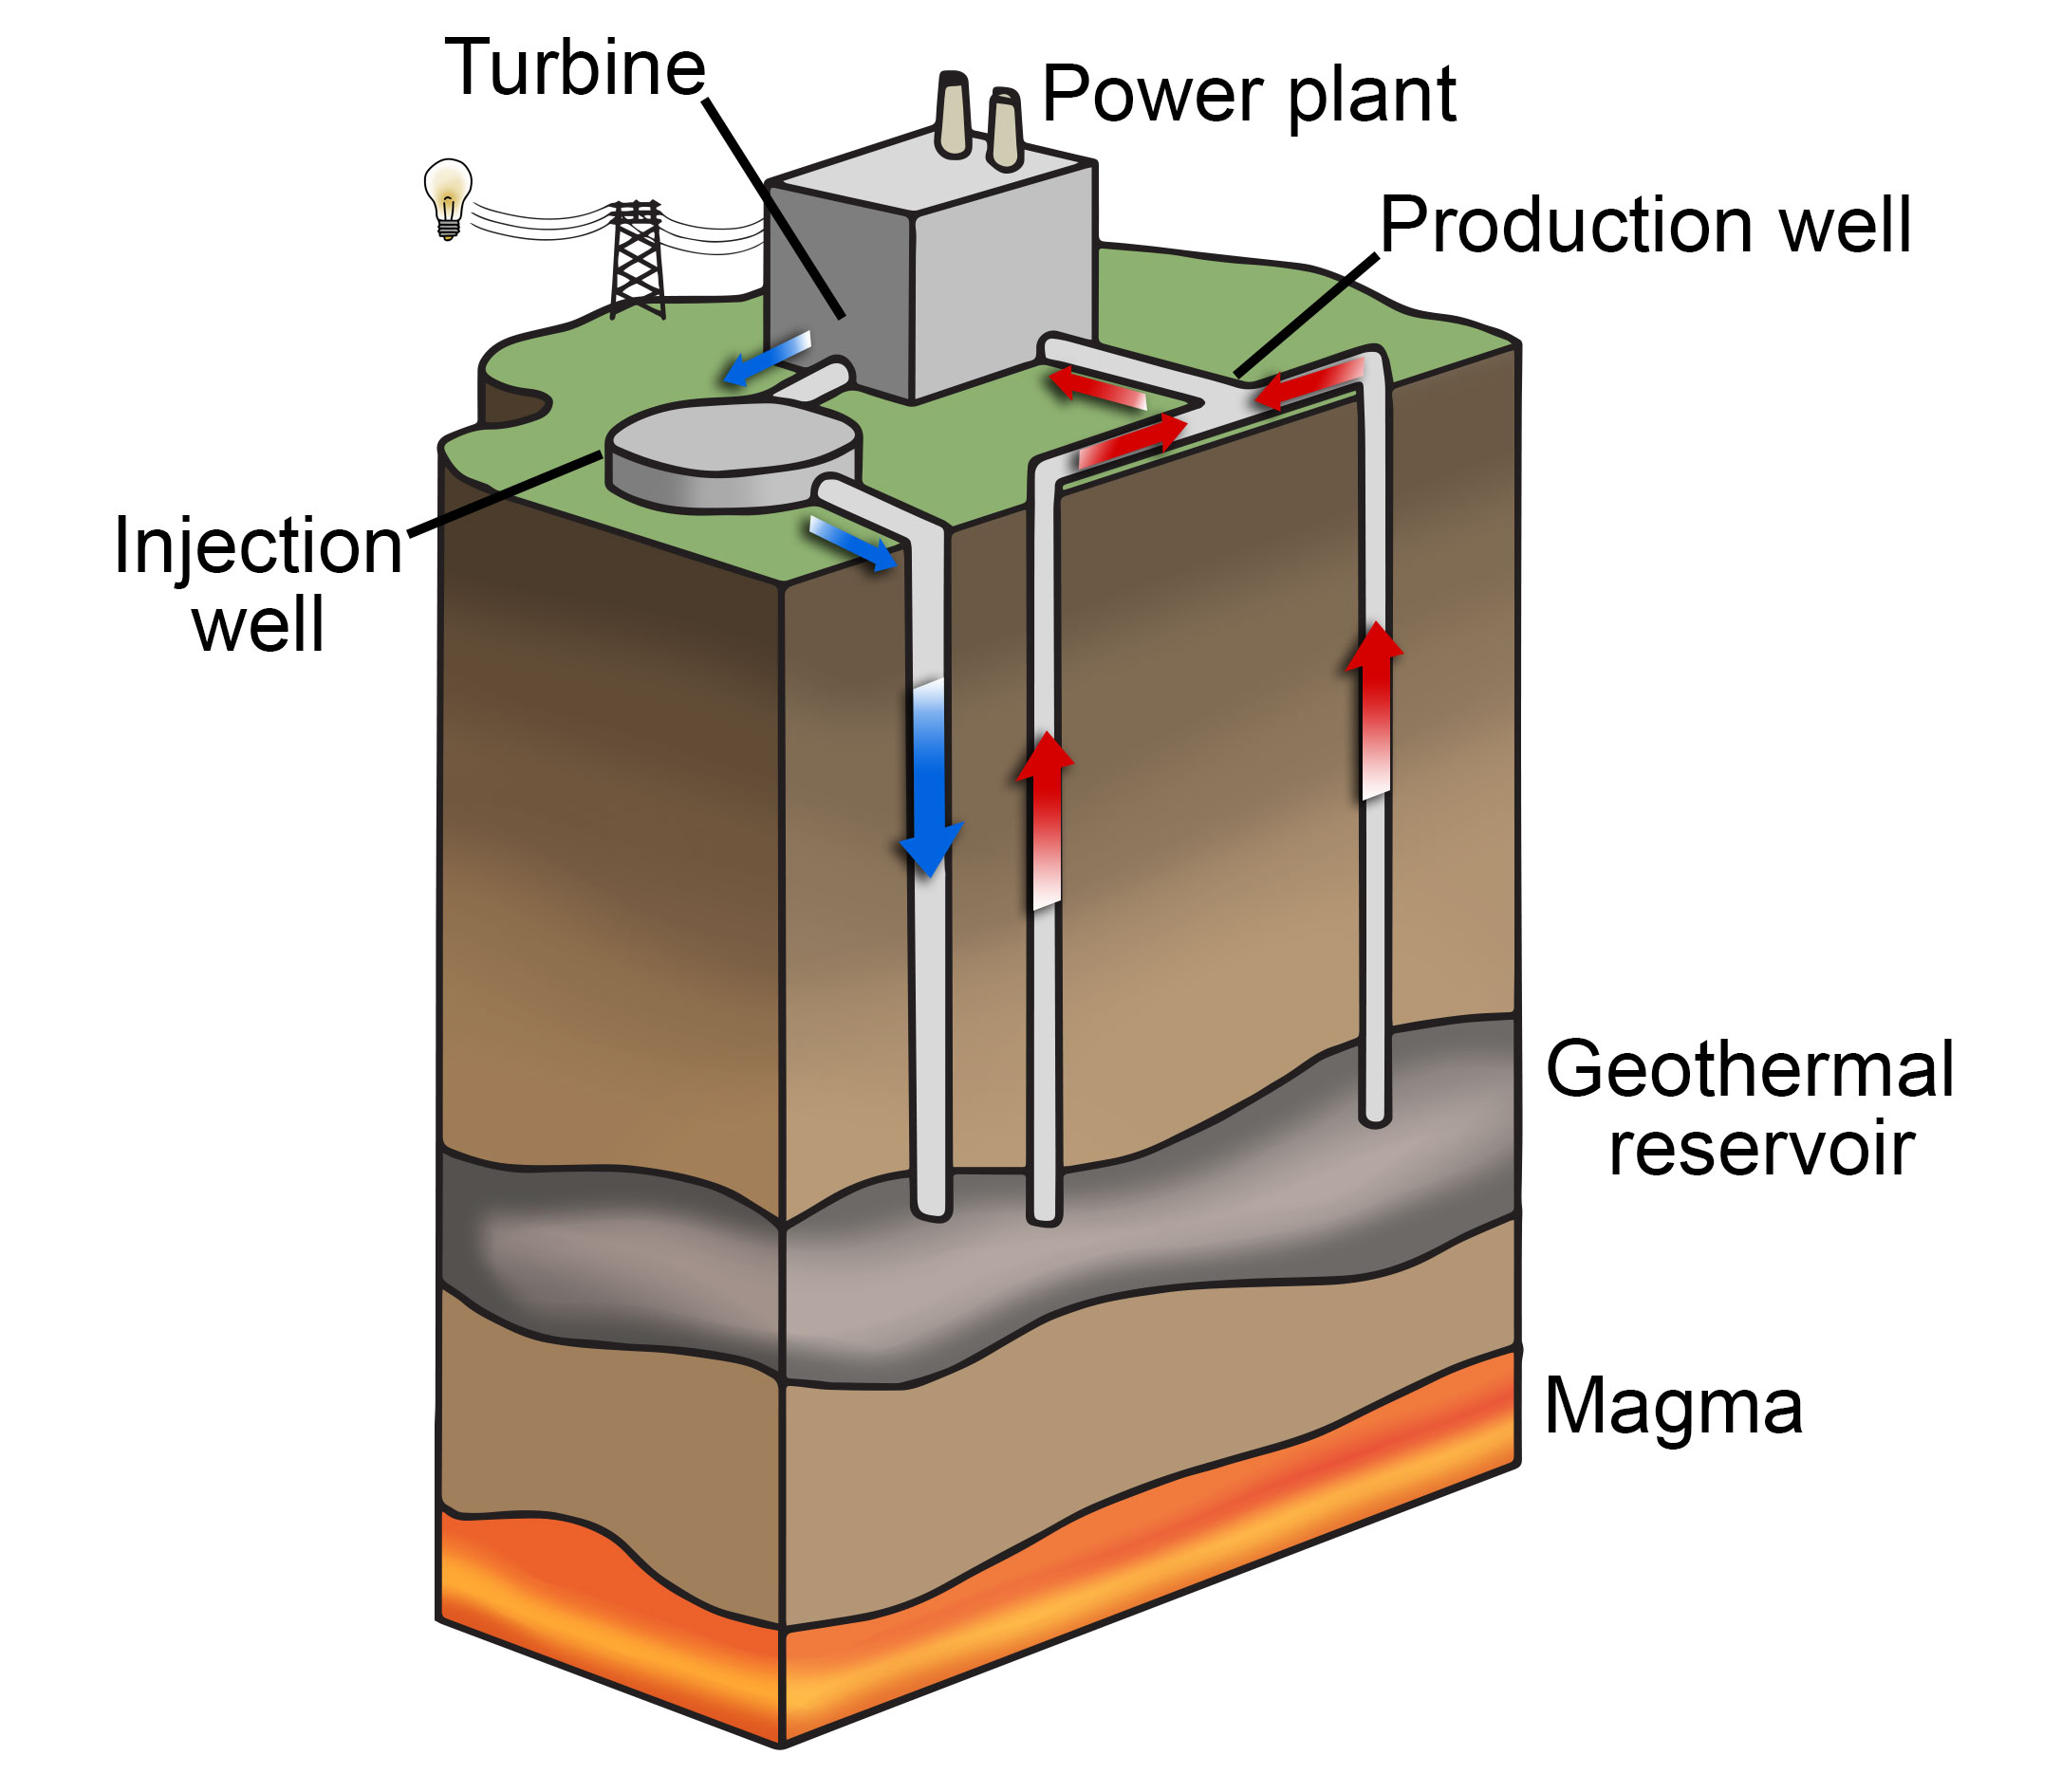 A diagram of a geothermal plant showing the power plant with turbine, the production well, the injection well, the underground geothermal reservoir, and magma below the reservoir.